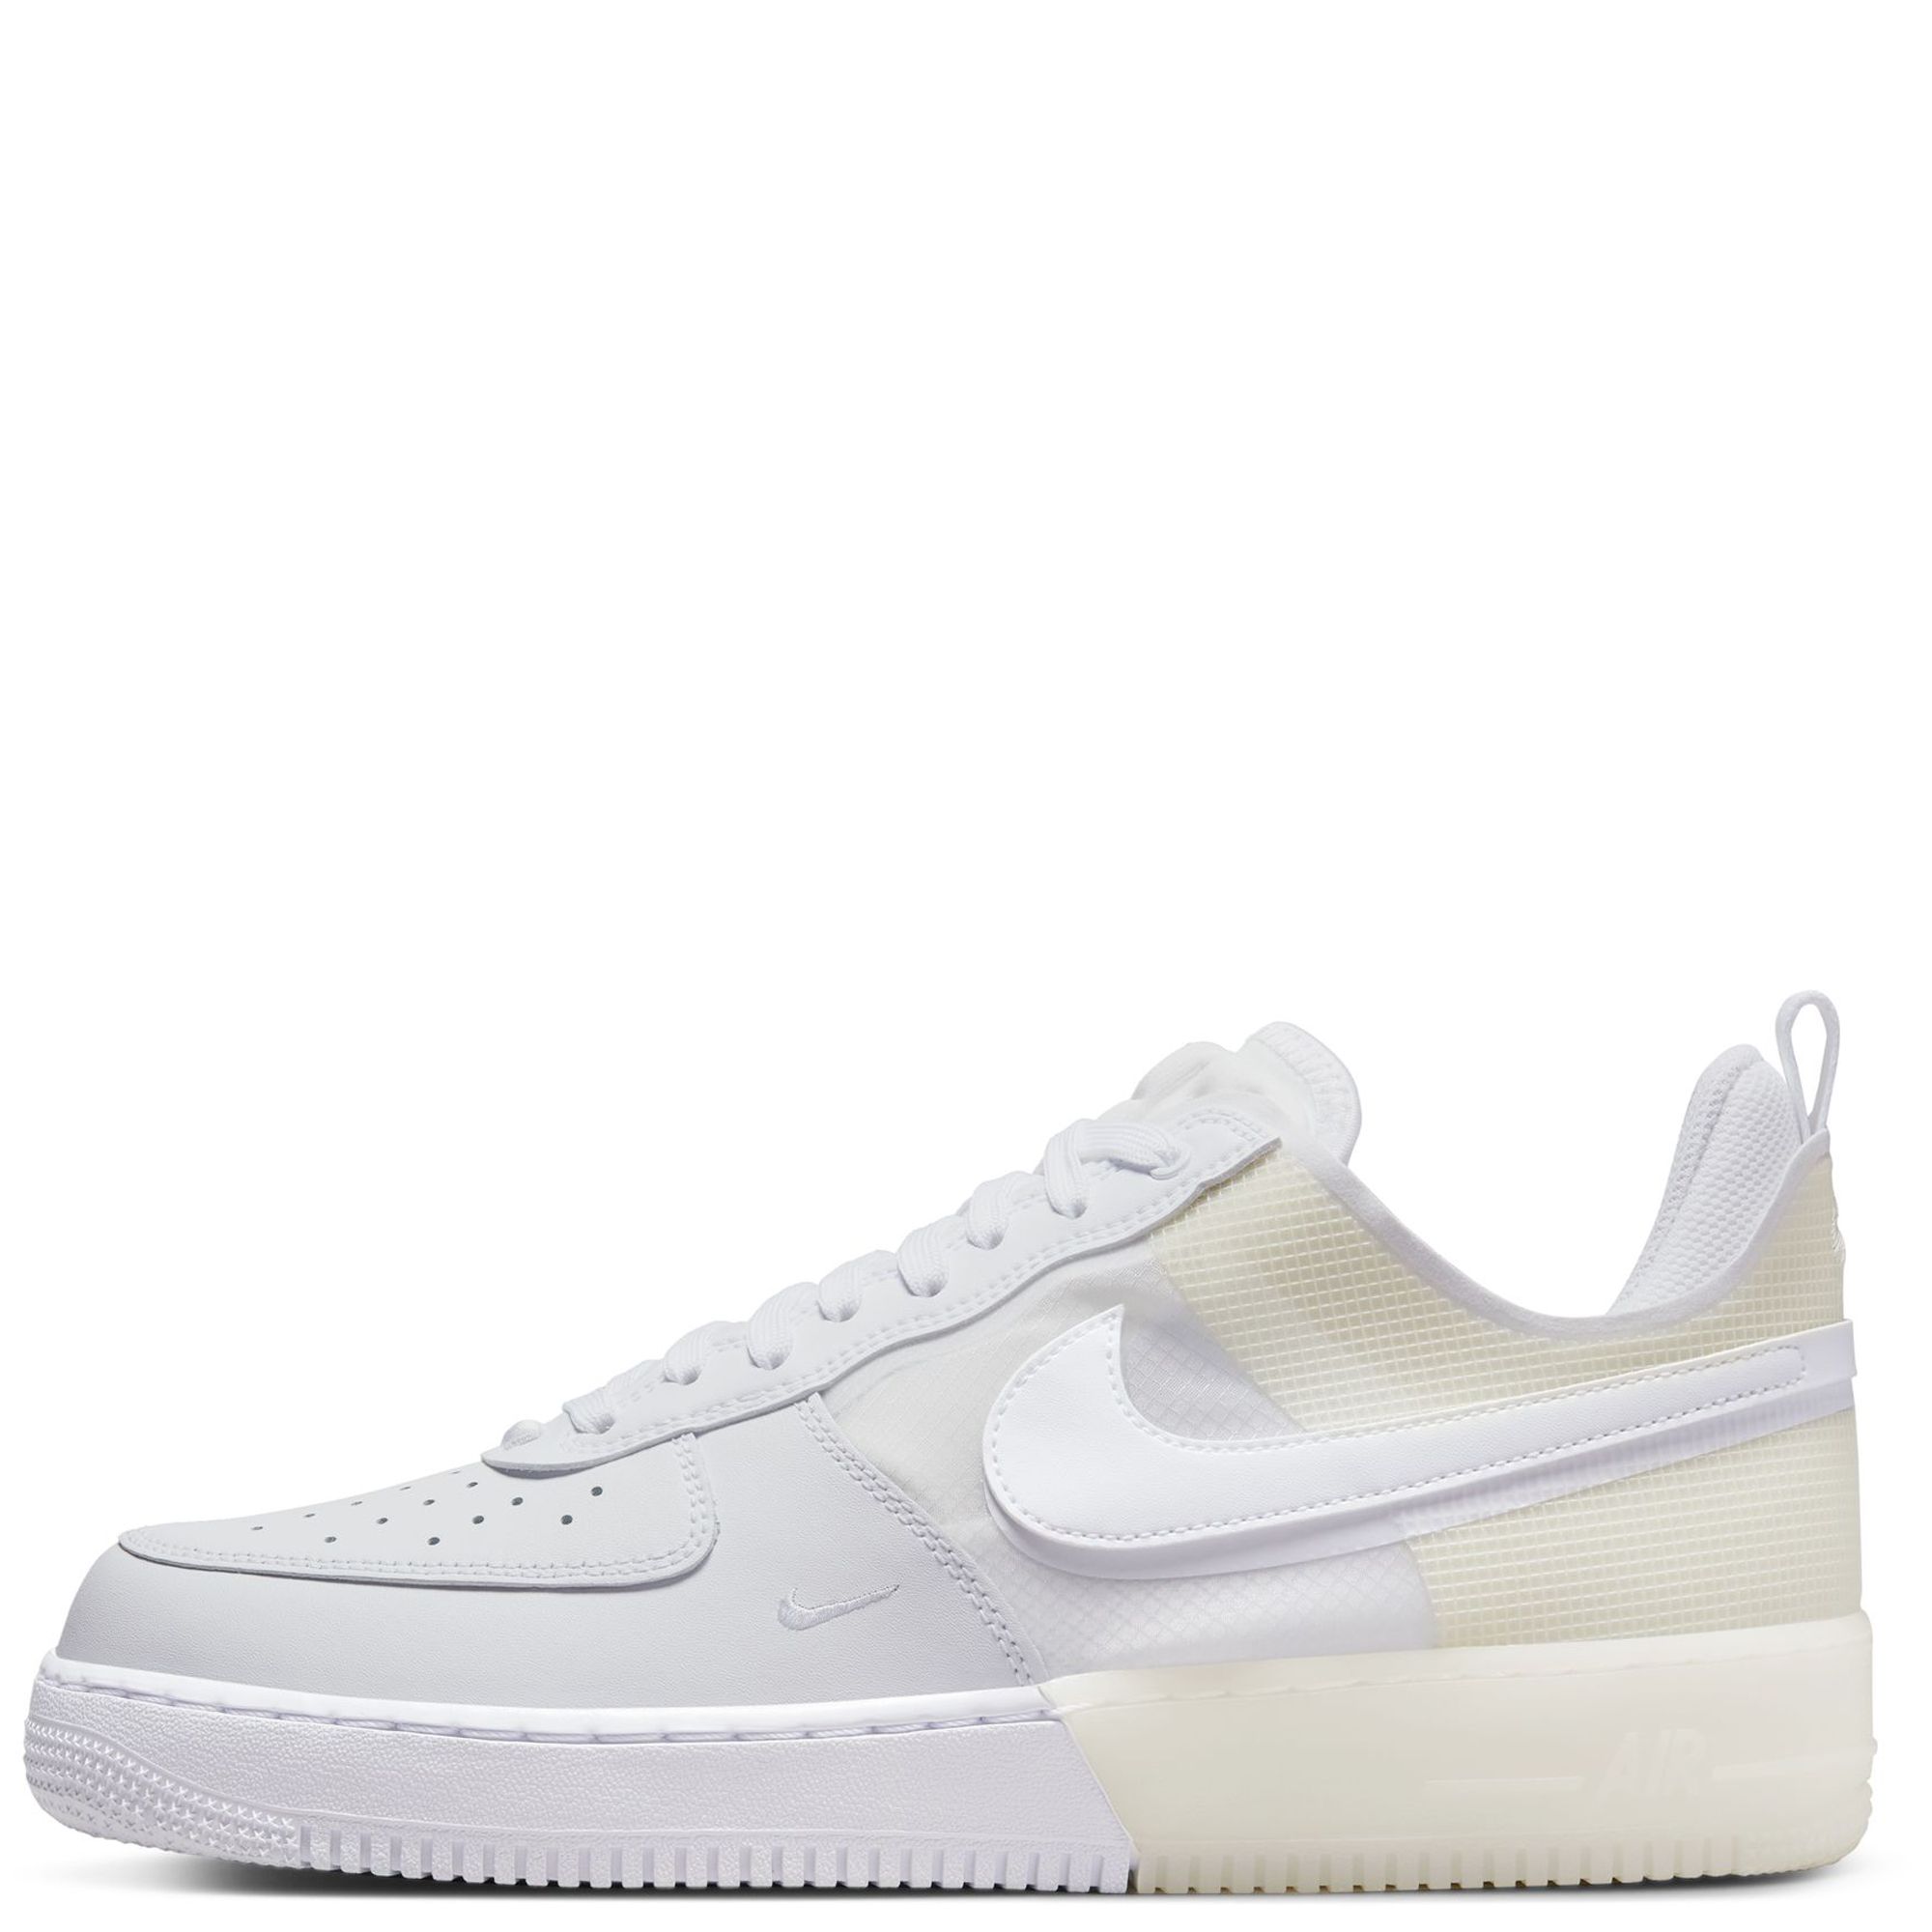 Nike Men's Air Force 1 React LV8 Casual Shoes